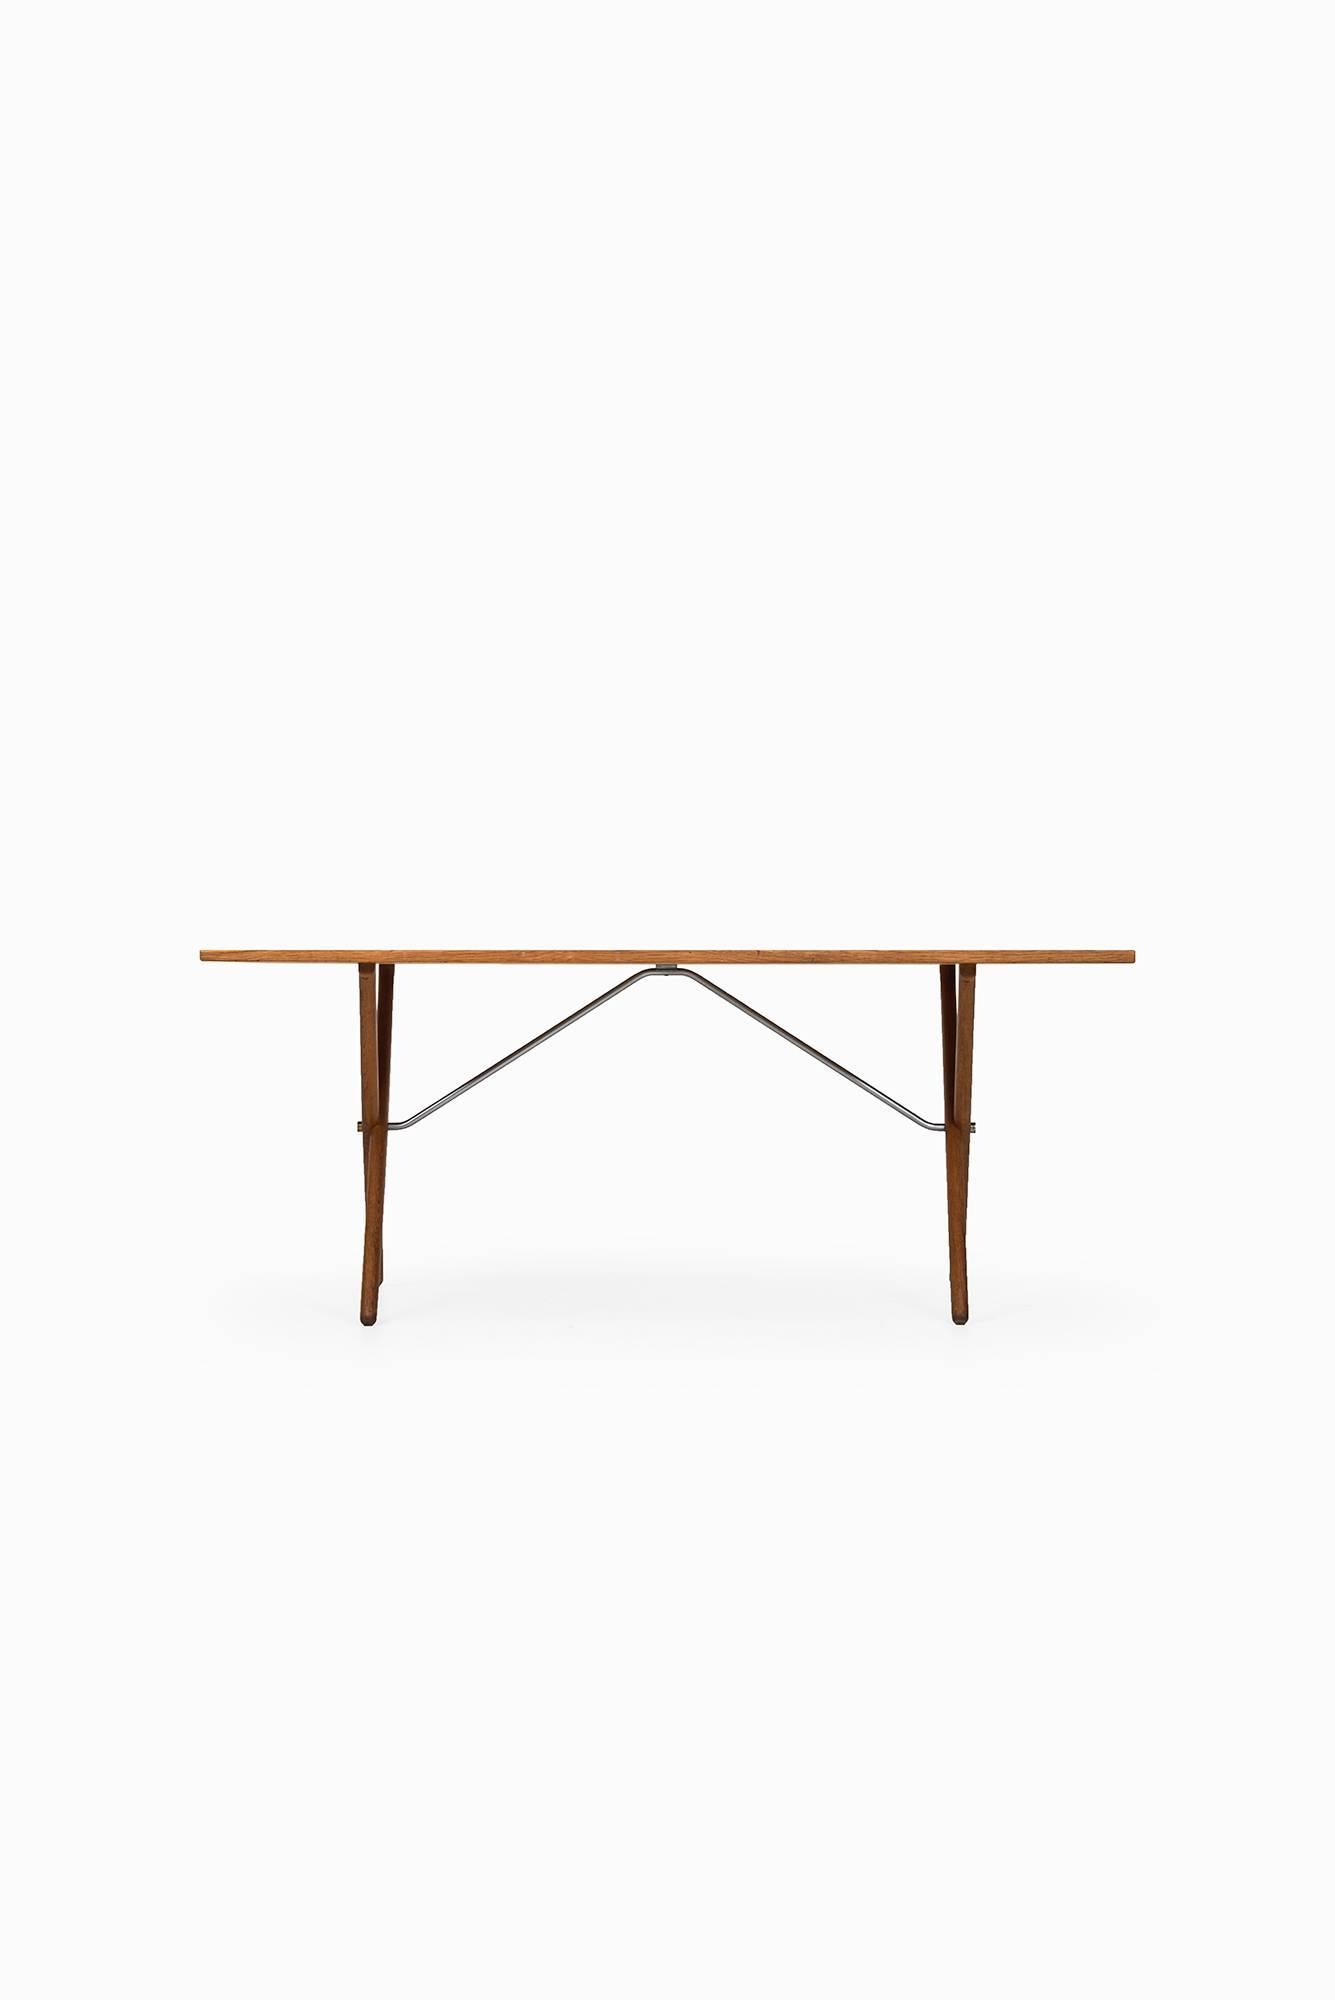 Rare dining table or desk model AT-303 designed by Hans Wegner. Produced by Andreas Tuck in Denmark.